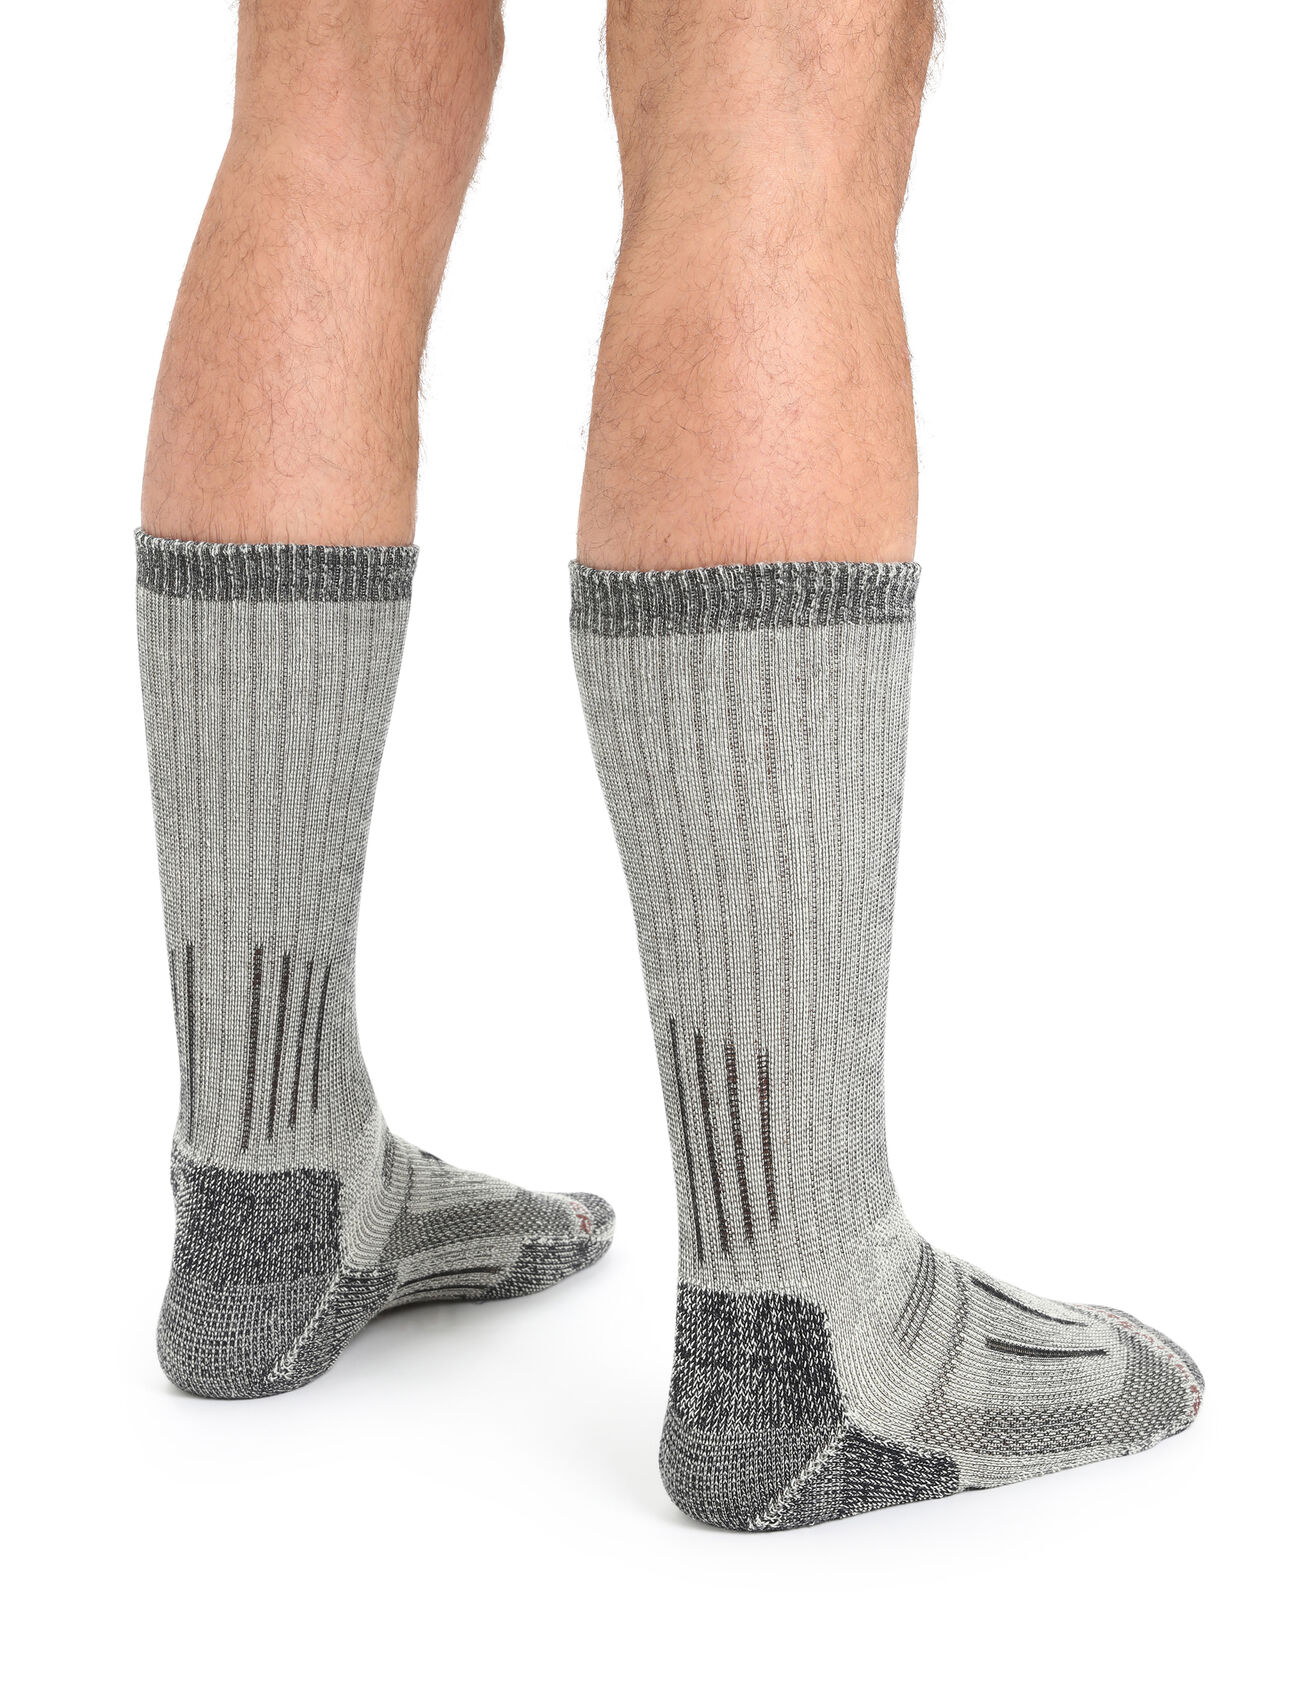 Thick Socks - Thick Wool Socks for a Better Winter - GoWith